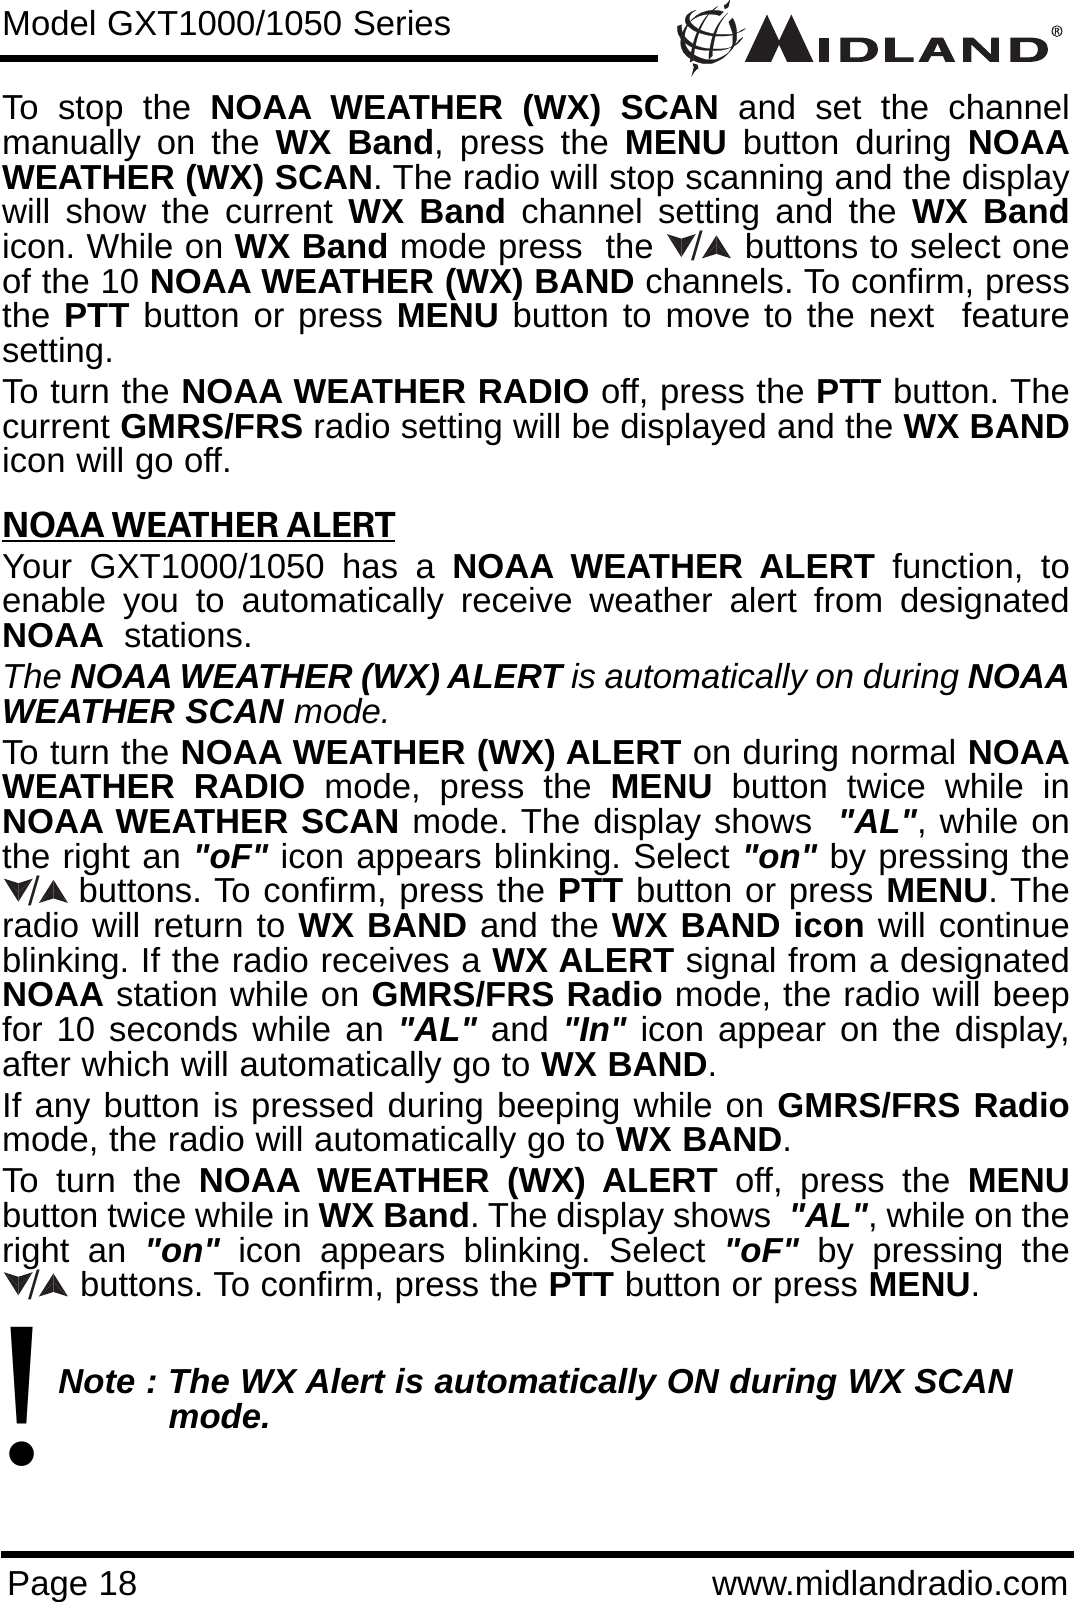 Page 18 www.midlandradio.comTo stop the NOAA WEATHER (WX) SCAN and set the channelmanually on the WX Band, press the MENU button during NOAAWEATHER (WX) SCAN. The radio will stop scanning and the displaywill show the current WX Band channel setting and the WX Bandicon. While on WX Band mode press  the        buttons to select oneof the 10 NOAA WEATHER (WX) BAND channels. To confirm, pressthe PTT button or press MENU button to move to the next  featuresetting.To turn the NOAA WEATHER RADIO off, press the PTT button. Thecurrent GMRS/FRS radio setting will be displayed and the WX BANDicon will go off.NOAA WEATHER ALERTYour GXT1000/1050 has a NOAA WEATHER ALERT function, toenable you to automatically receive weather alert from designatedNOAA stations. The NOAA WEATHER (WX) ALERT is automatically on during NOAAWEATHER SCAN mode.To turn the NOAA WEATHER (WX) ALERT on during normal NOAAWEATHER RADIO mode, press the MENU button twice while inNOAA WEATHER SCAN mode. The display shows  &quot;AL&quot;, while onthe right an &quot;oF&quot; icon appears blinking. Select &quot;on&quot; by pressing thebuttons. To confirm, press the PTT button or press MENU. Theradio will return to WX BAND and the WX BAND icon will continueblinking. If the radio receives a WX ALERT signal from a designatedNOAA station while on GMRS/FRS Radio mode, the radio will beepfor 10 seconds while an &quot;AL&quot; and &quot;In&quot; icon appear on the display,after which will automatically go to WX BAND. If any button is pressed during beeping while on GMRS/FRS Radiomode, the radio will automatically go to WX BAND.To turn the NOAA WEATHER (WX) ALERT off, press the MENUbutton twice while in WX Band. The display shows  &quot;AL&quot;, while on theright an &quot;on&quot; icon appears blinking. Select &quot;oF&quot; by pressing thebuttons. To confirm, press the PTT button or press MENU.Note : The WX Alert is automatically ON during WX SCAN mode.Model GXT1000/1050 Series/!//